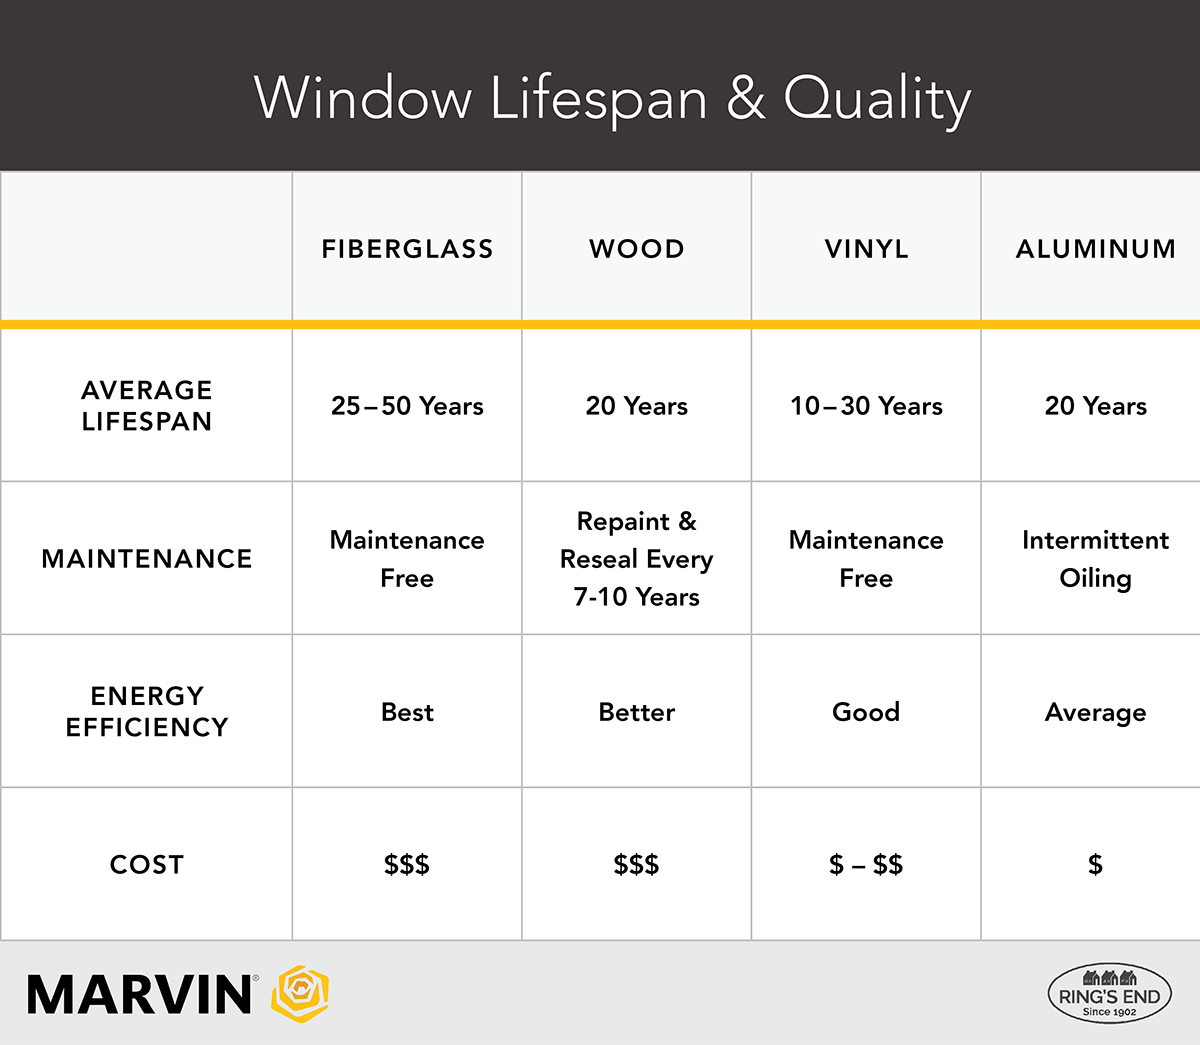 Infographic comparing the lifespan and quality of fiberglass, wood, vinyl, and aluminum windows. Fiberglass has the best energy efficiency and lifespan.